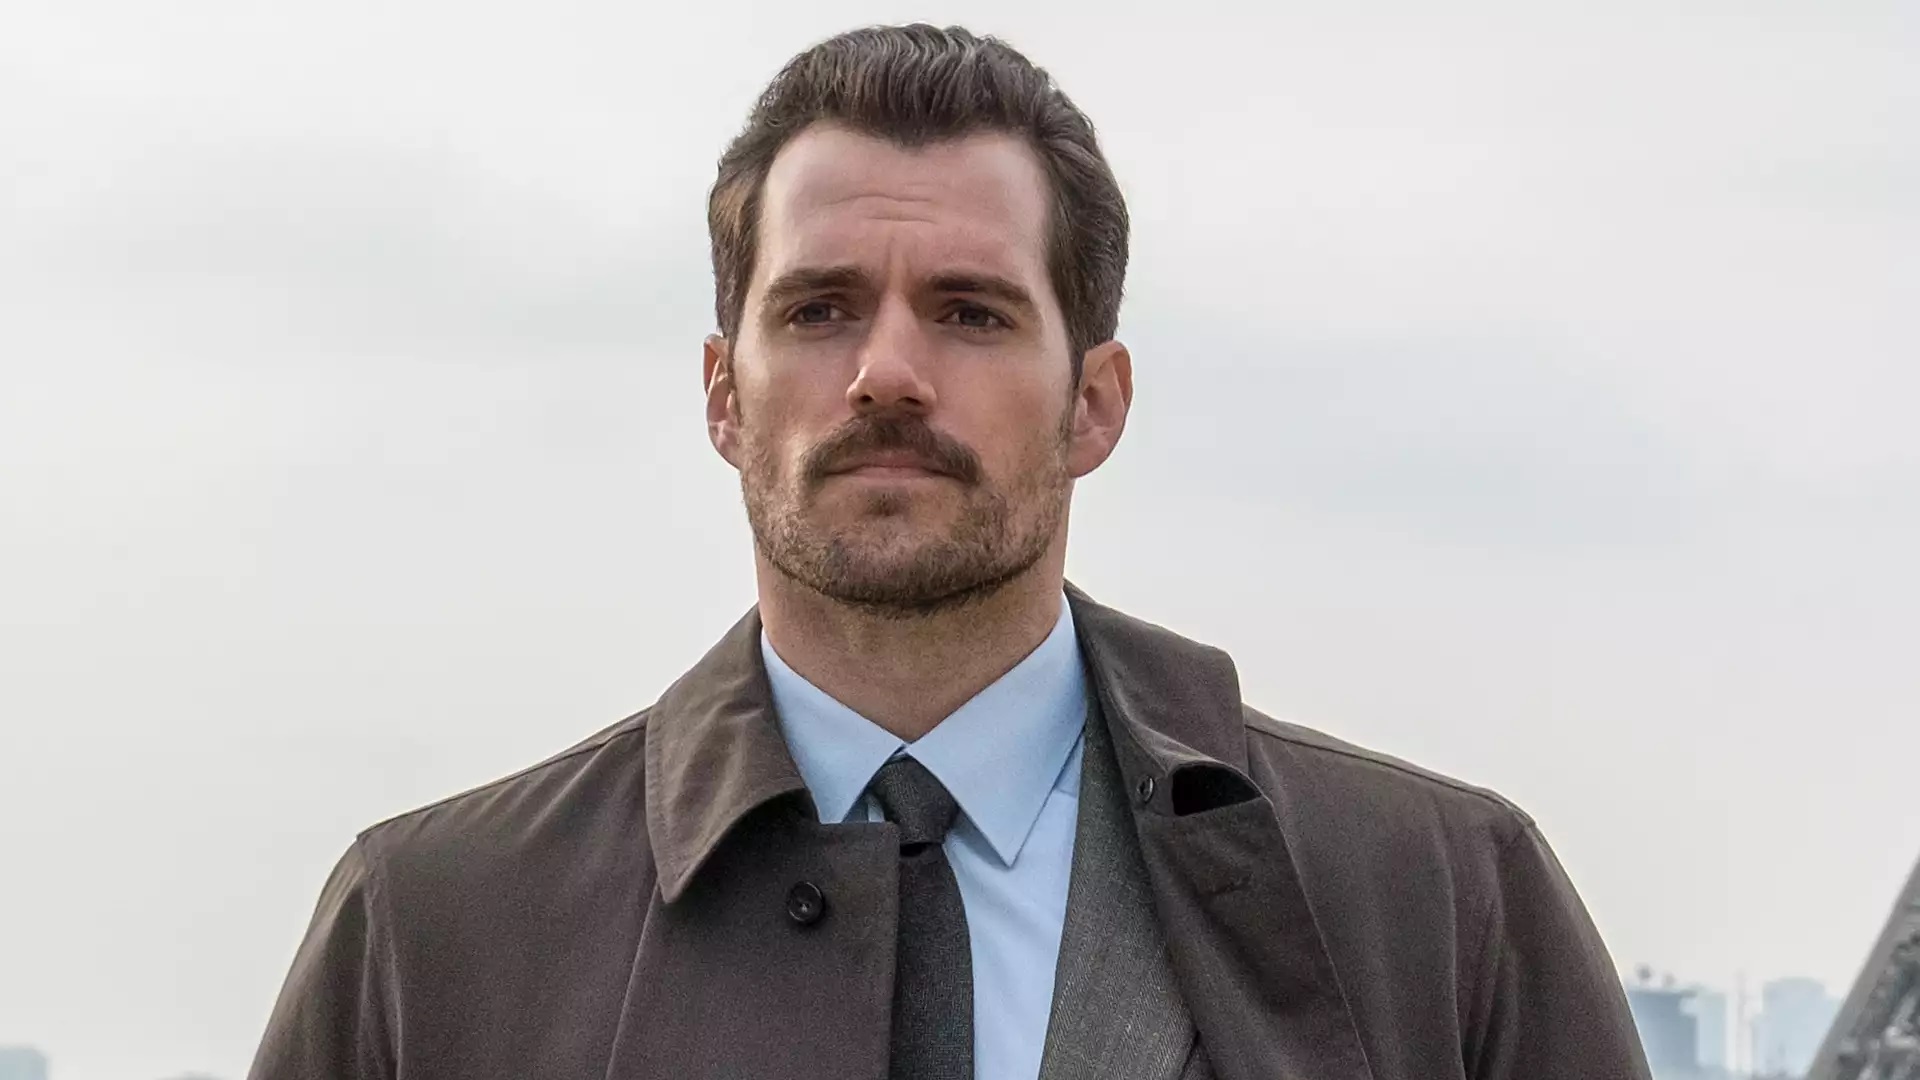 Henry Cavill as August Walker in Mission: Impossible - Fallout